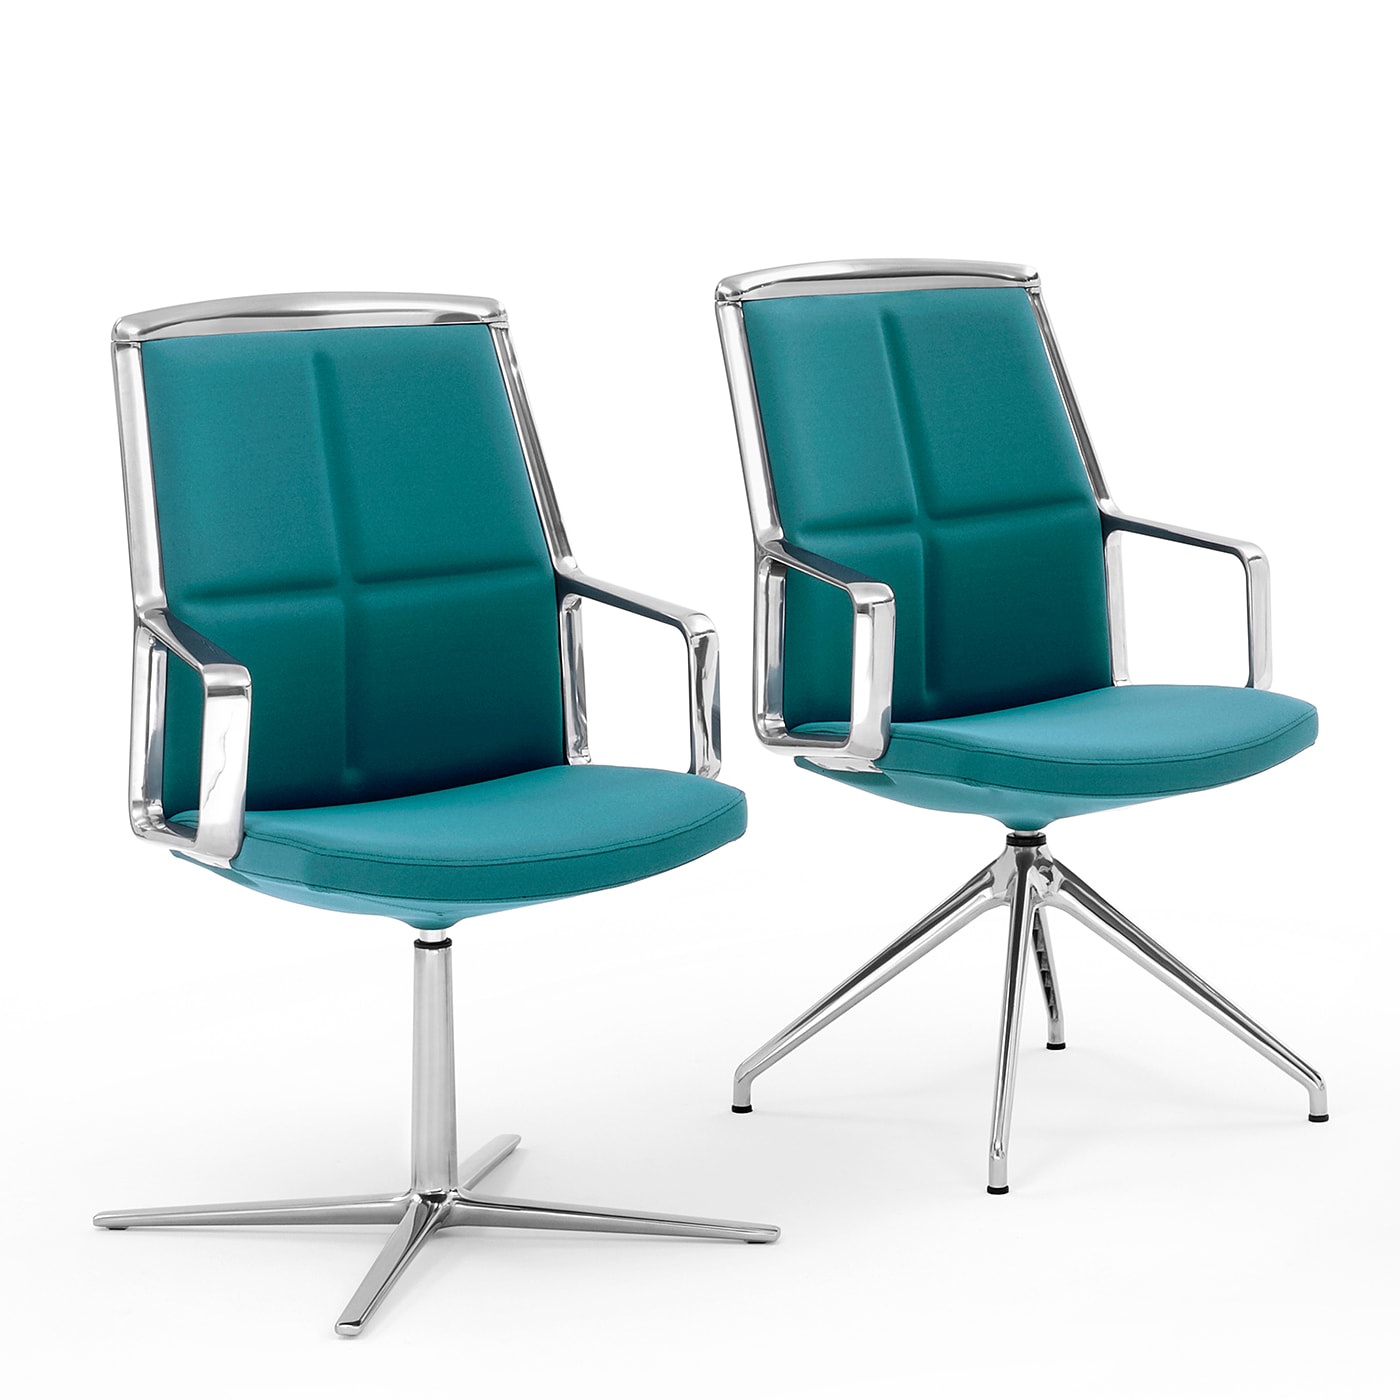 ADELE BLUE-GREEN MEETING CHAIR #2 by ORLANDINIDESIGN - Viganò & C.